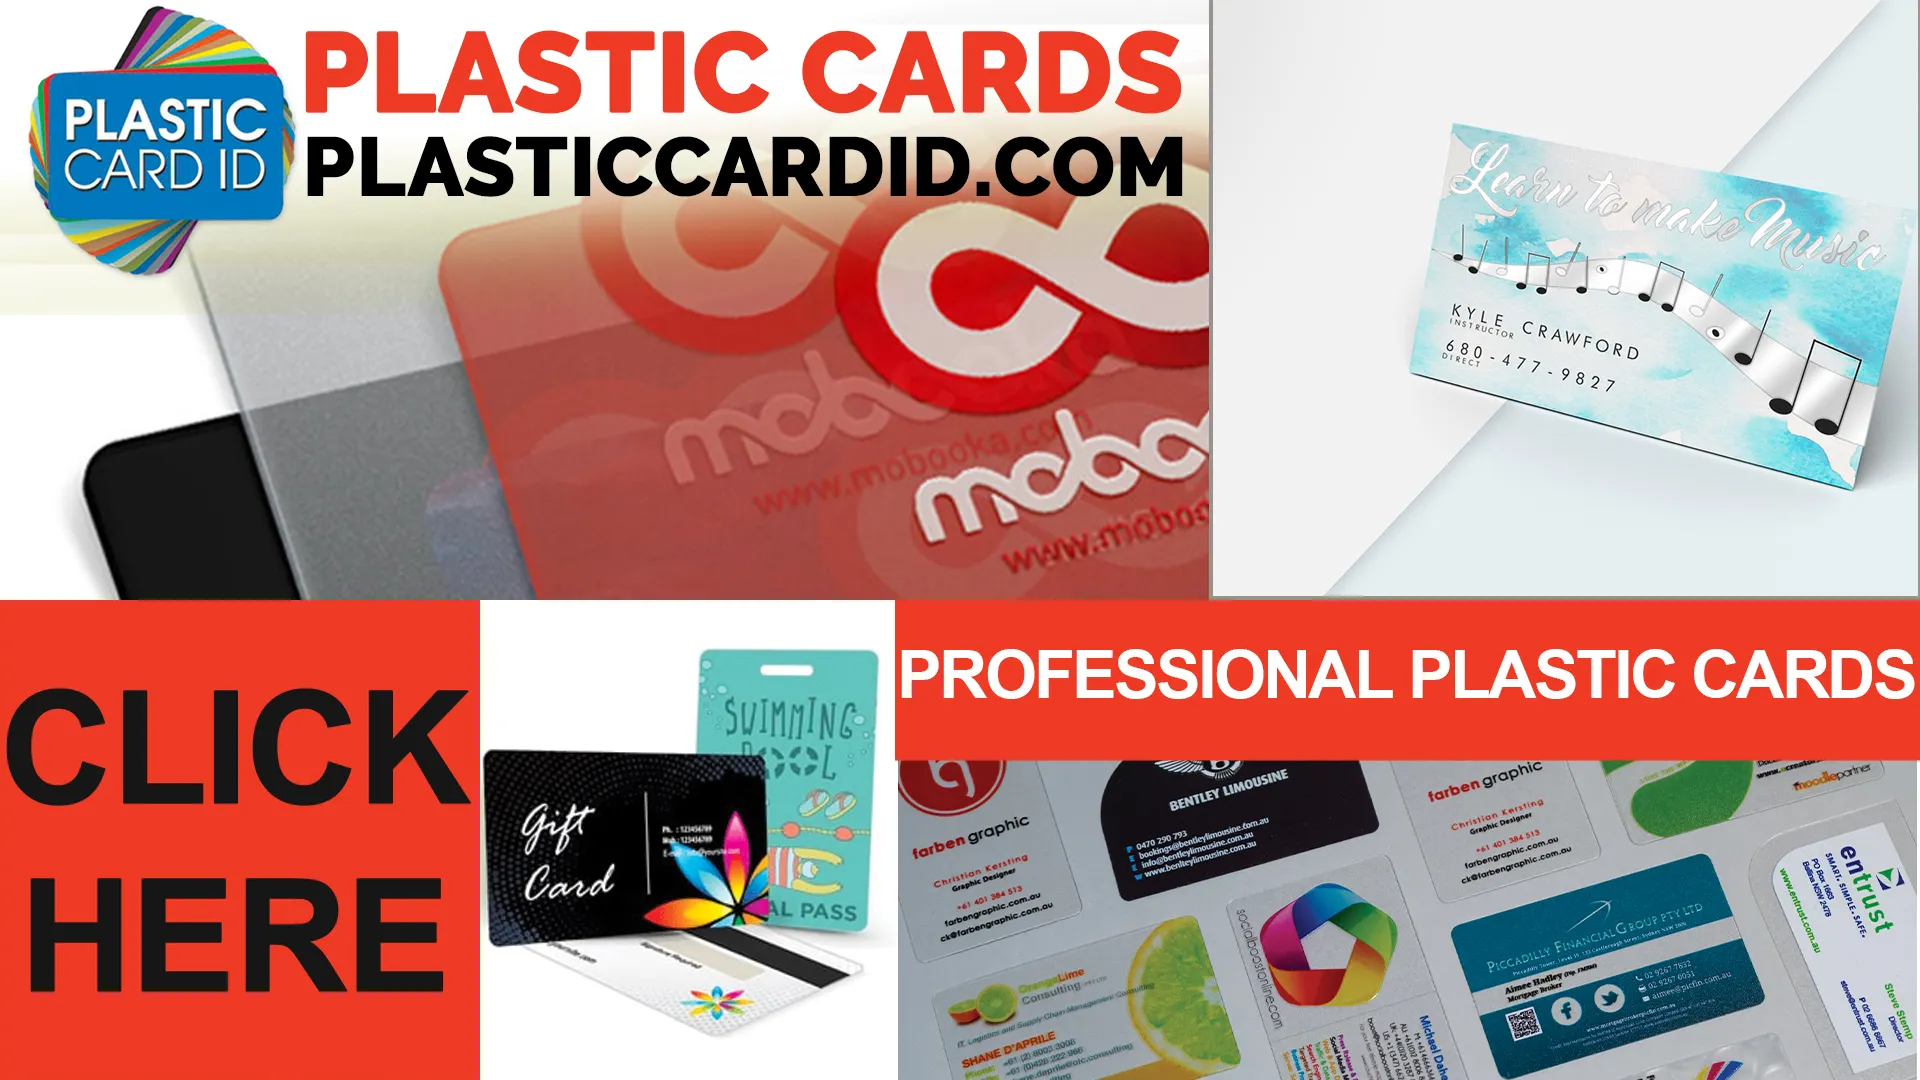 Exceeding Industry Standards with Every Card